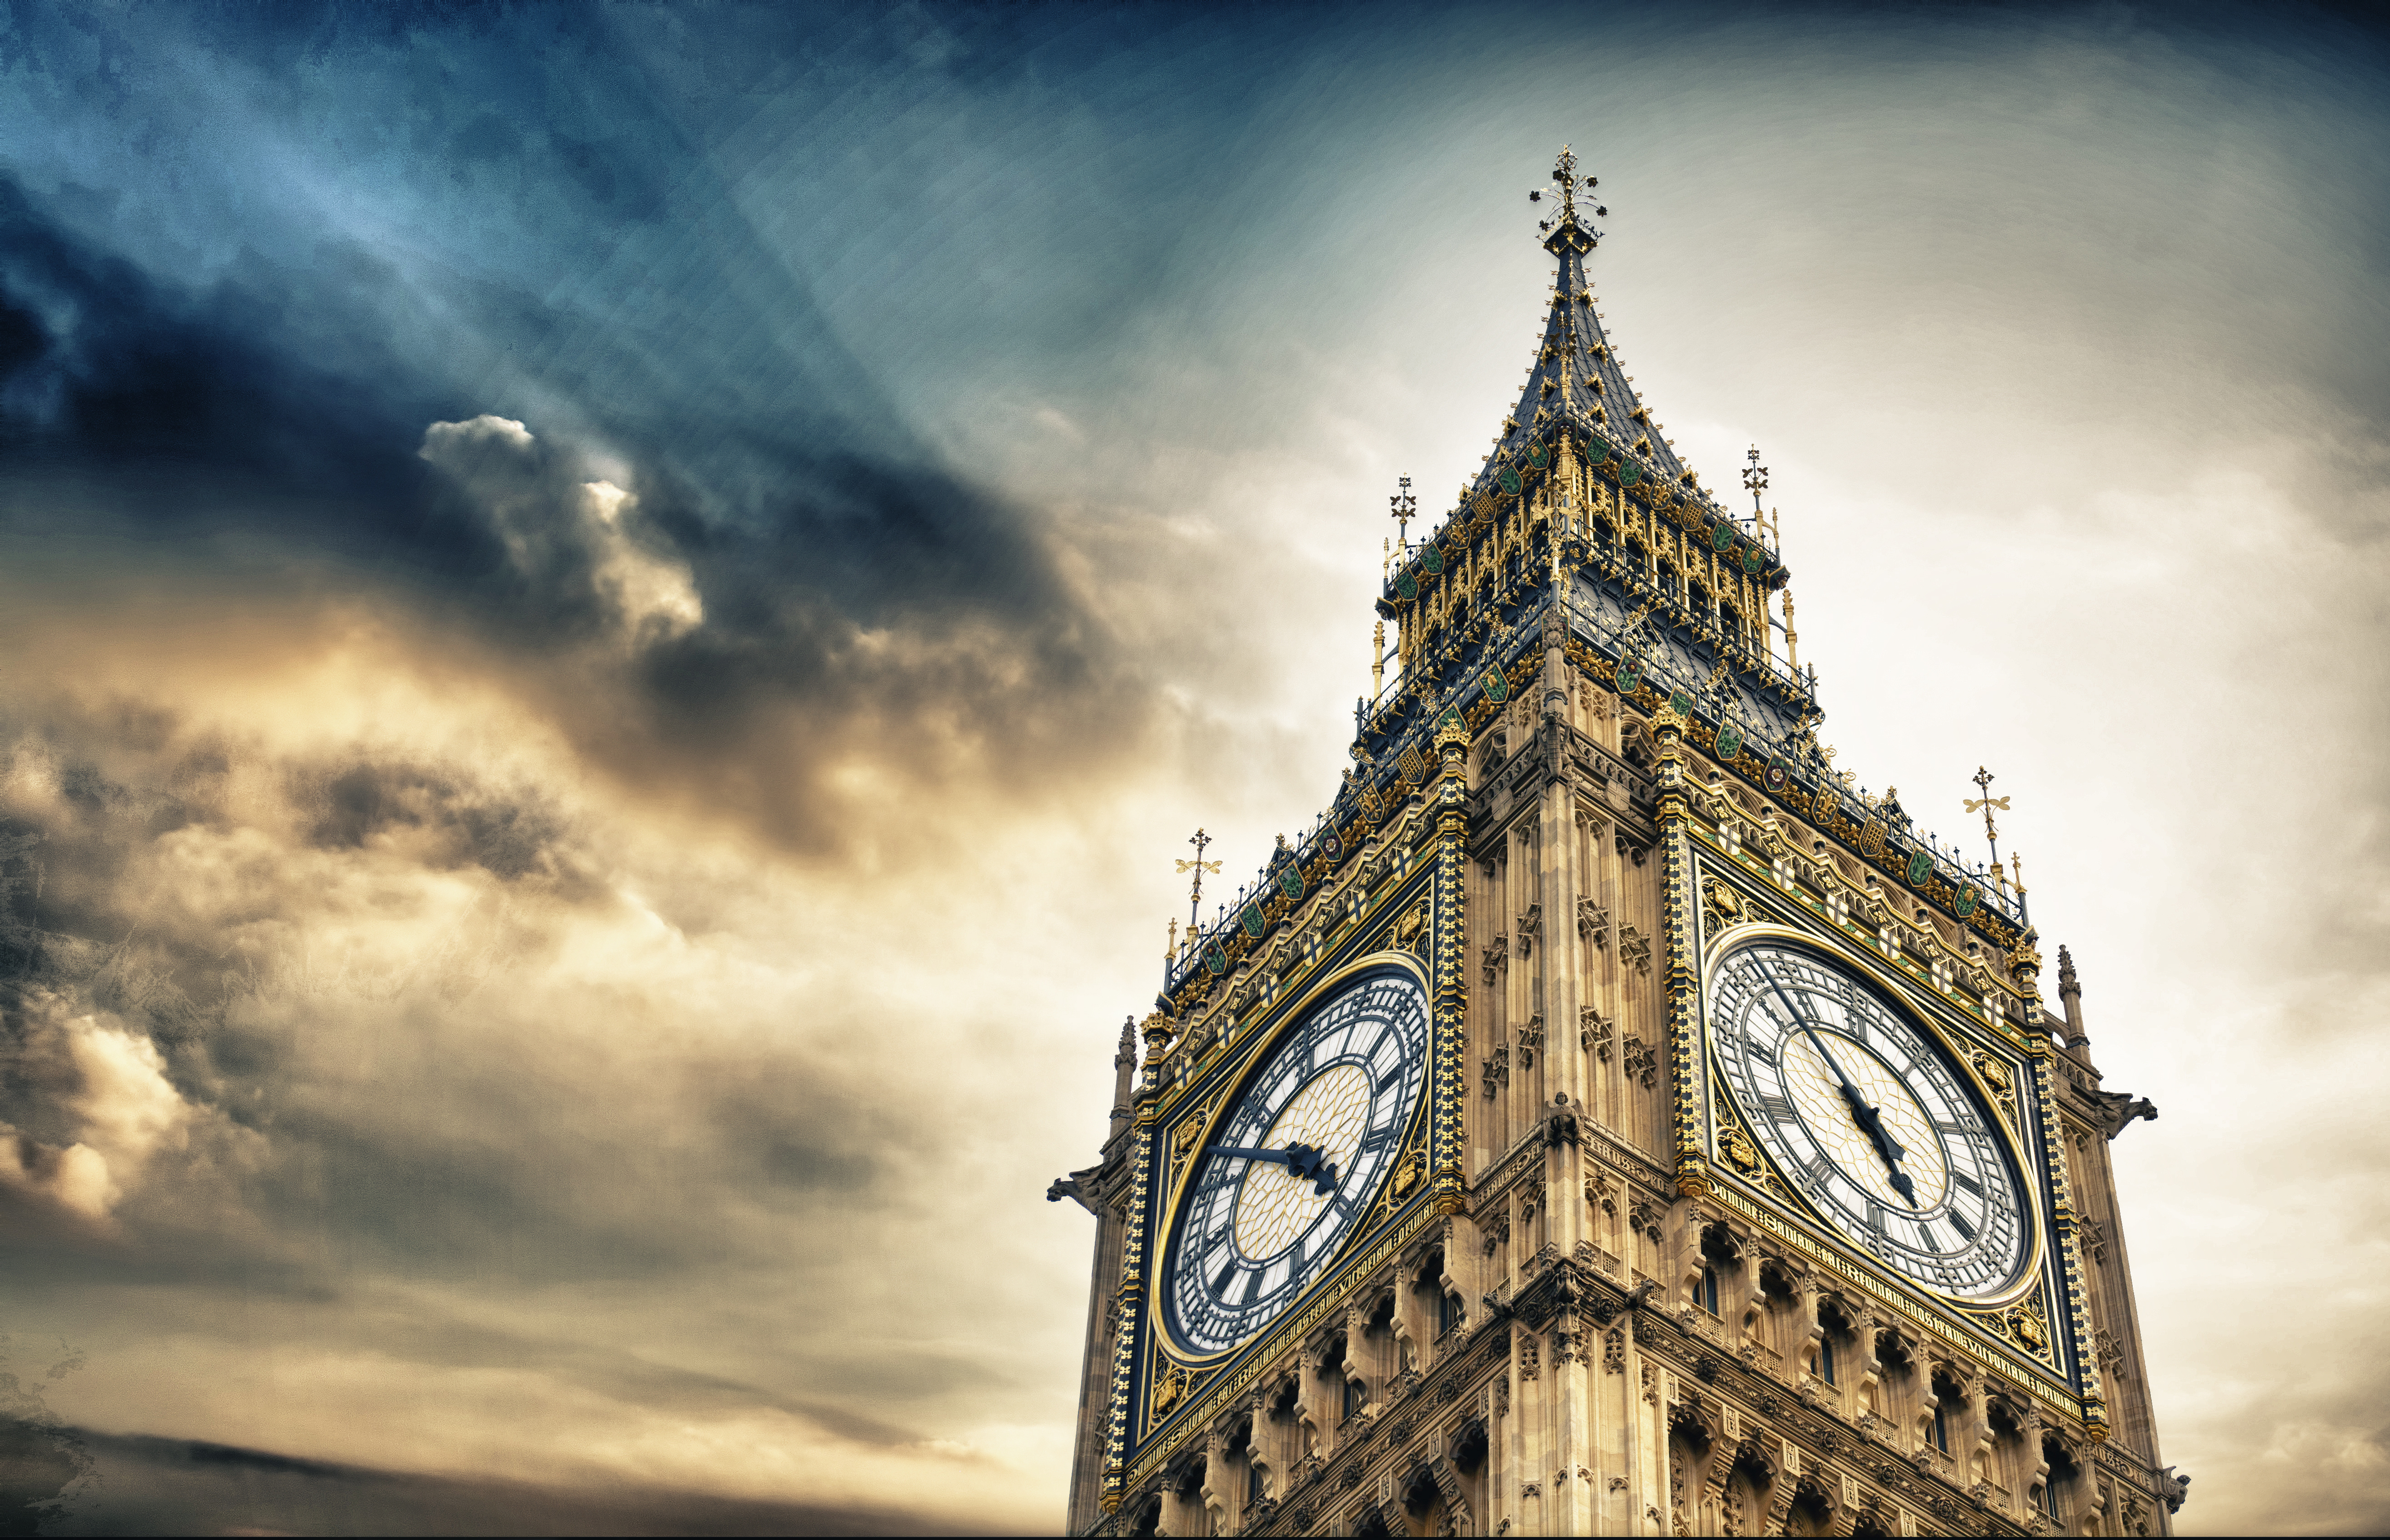 Is it right to silence Big Ben for workers' hearing?